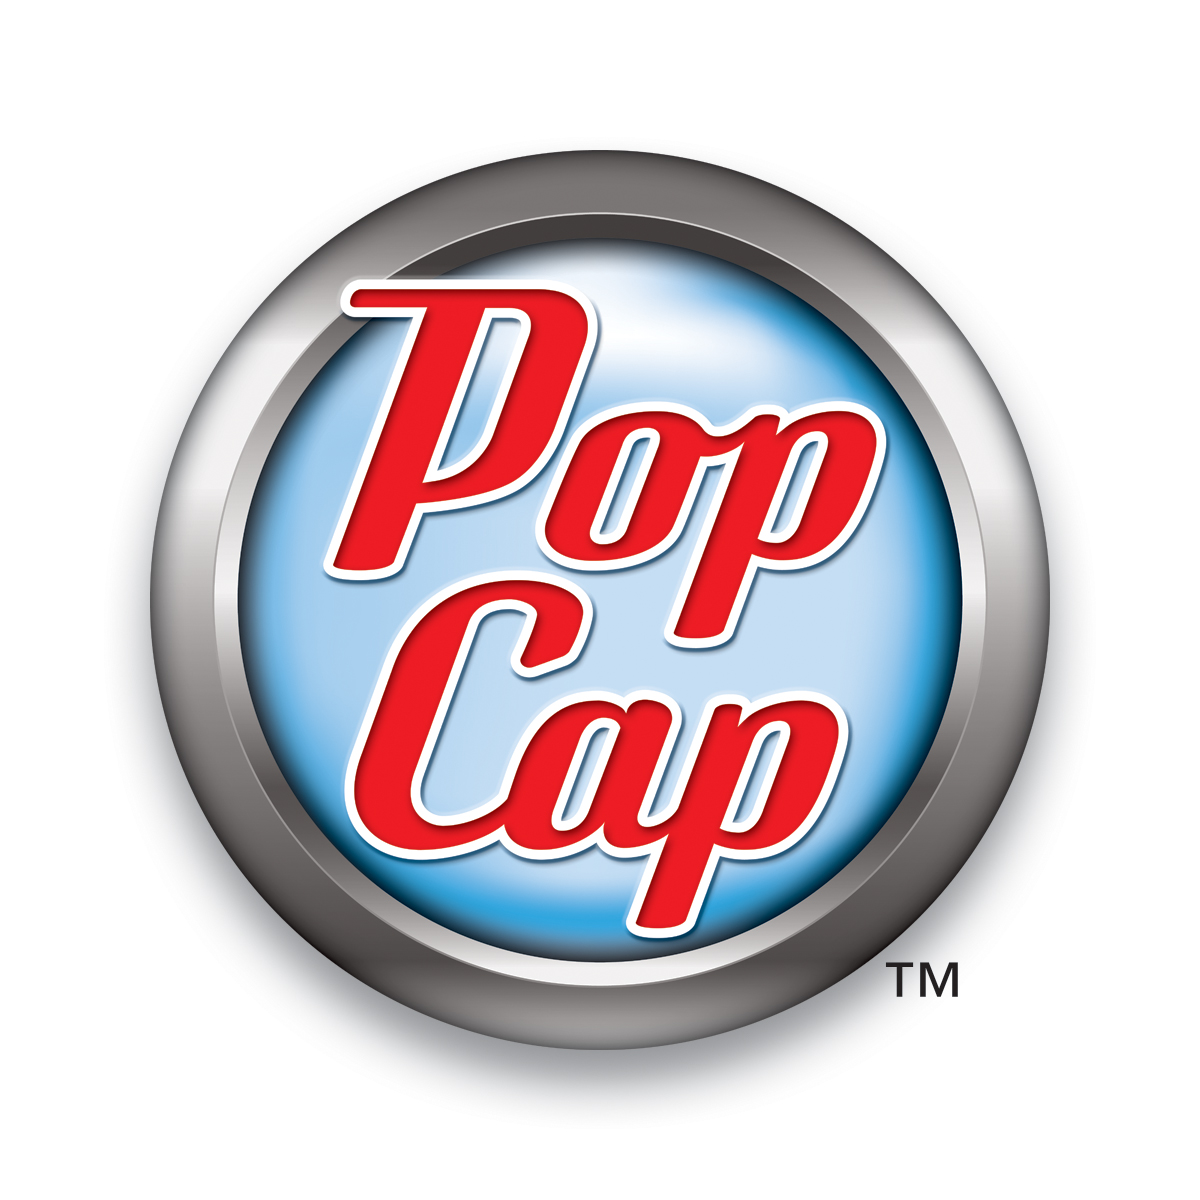 All 51 Popcap Games Collection With Keygen Free Full 29